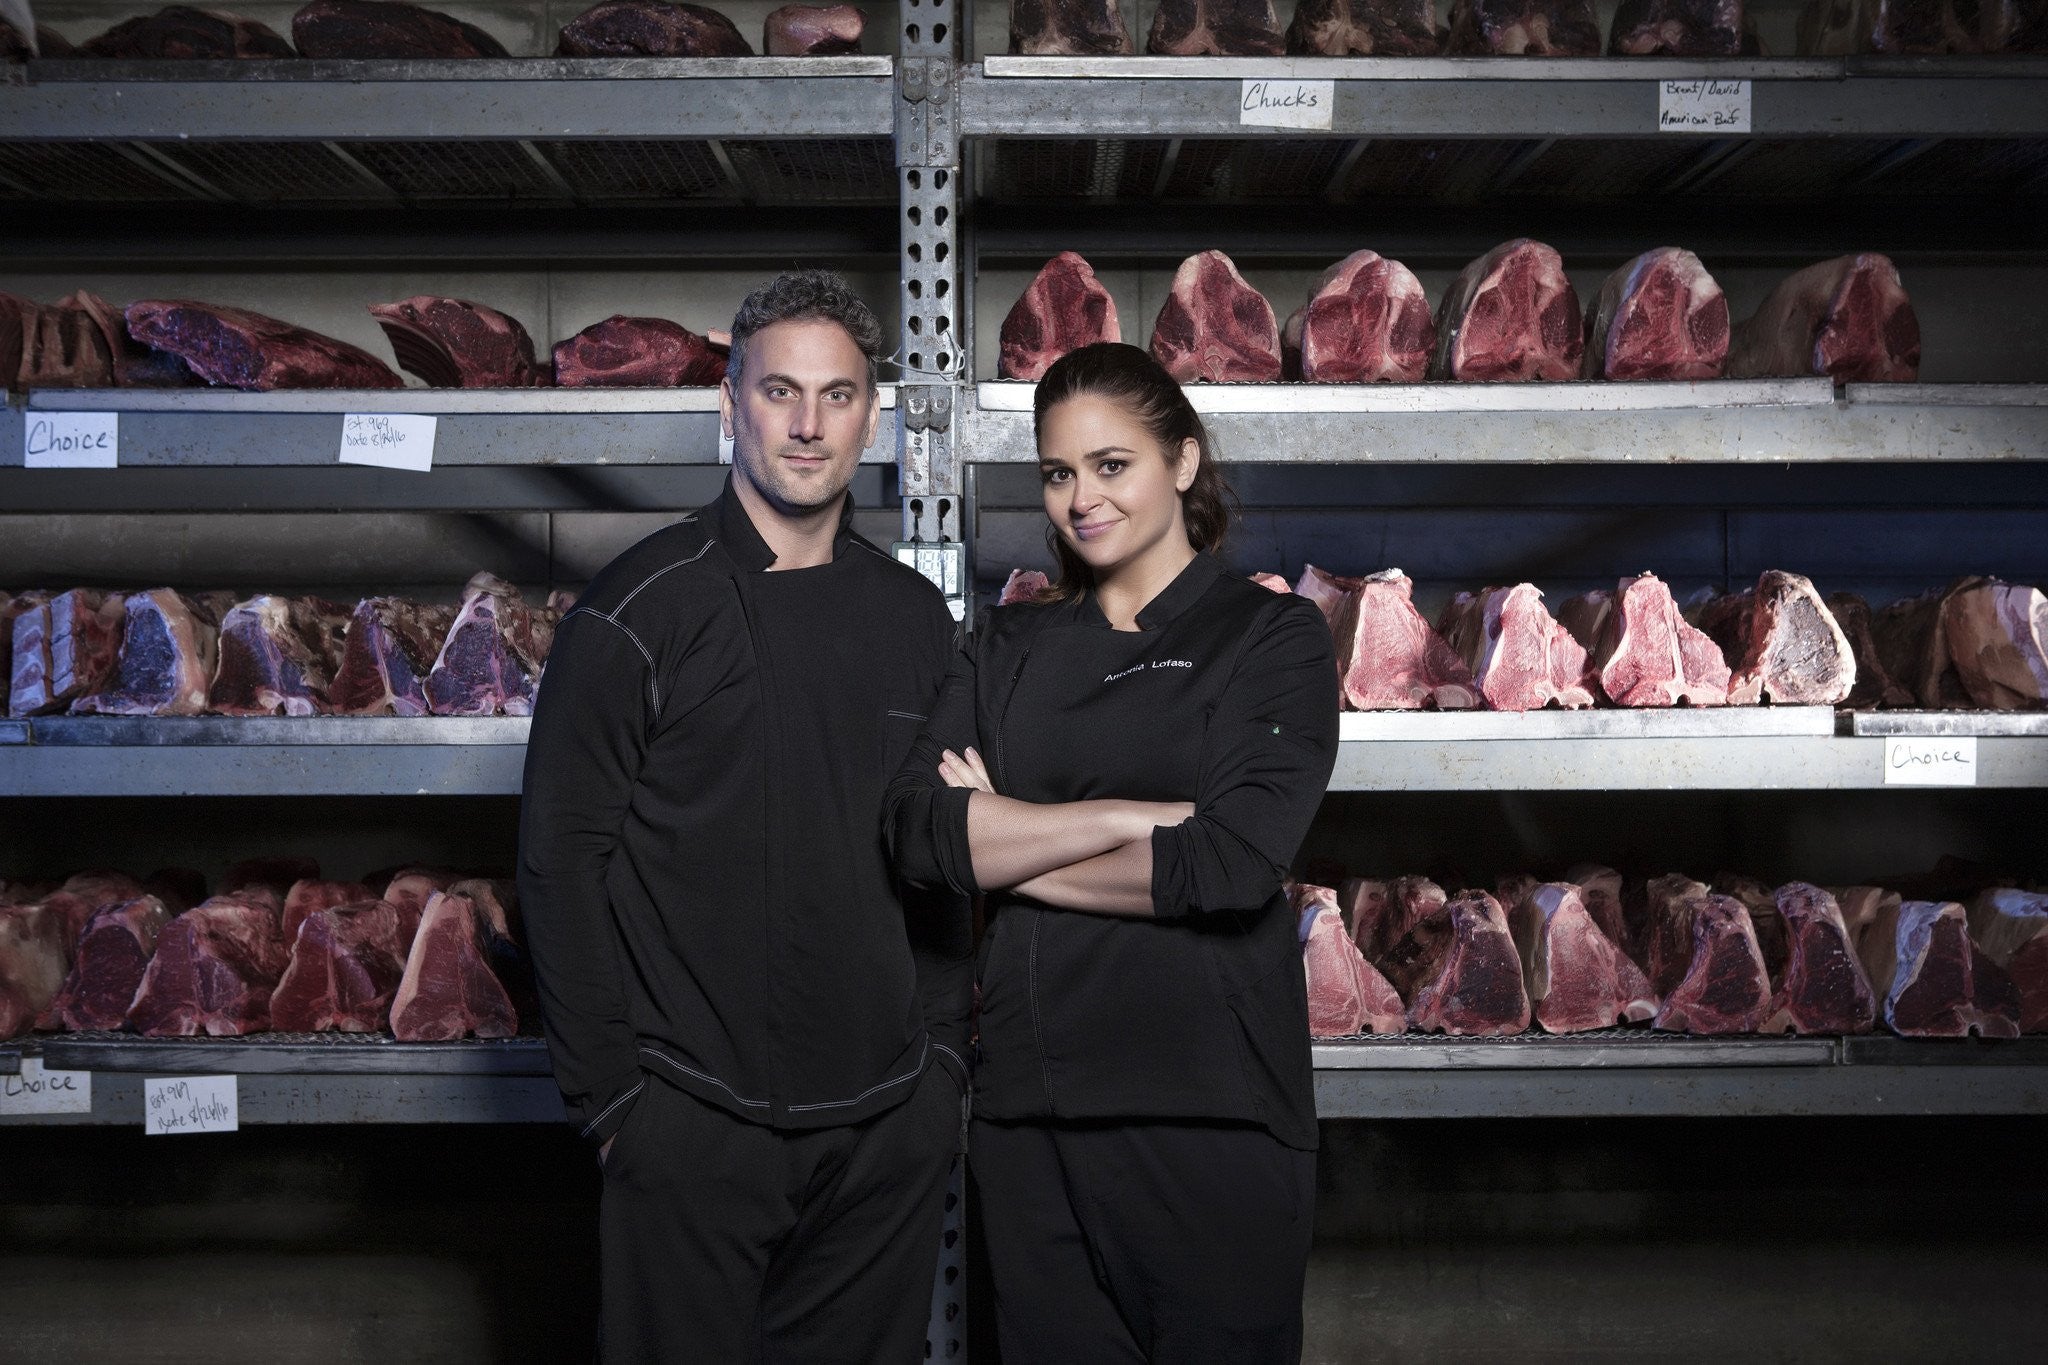 Salvatore and Antonia standing in front of shelves of meat